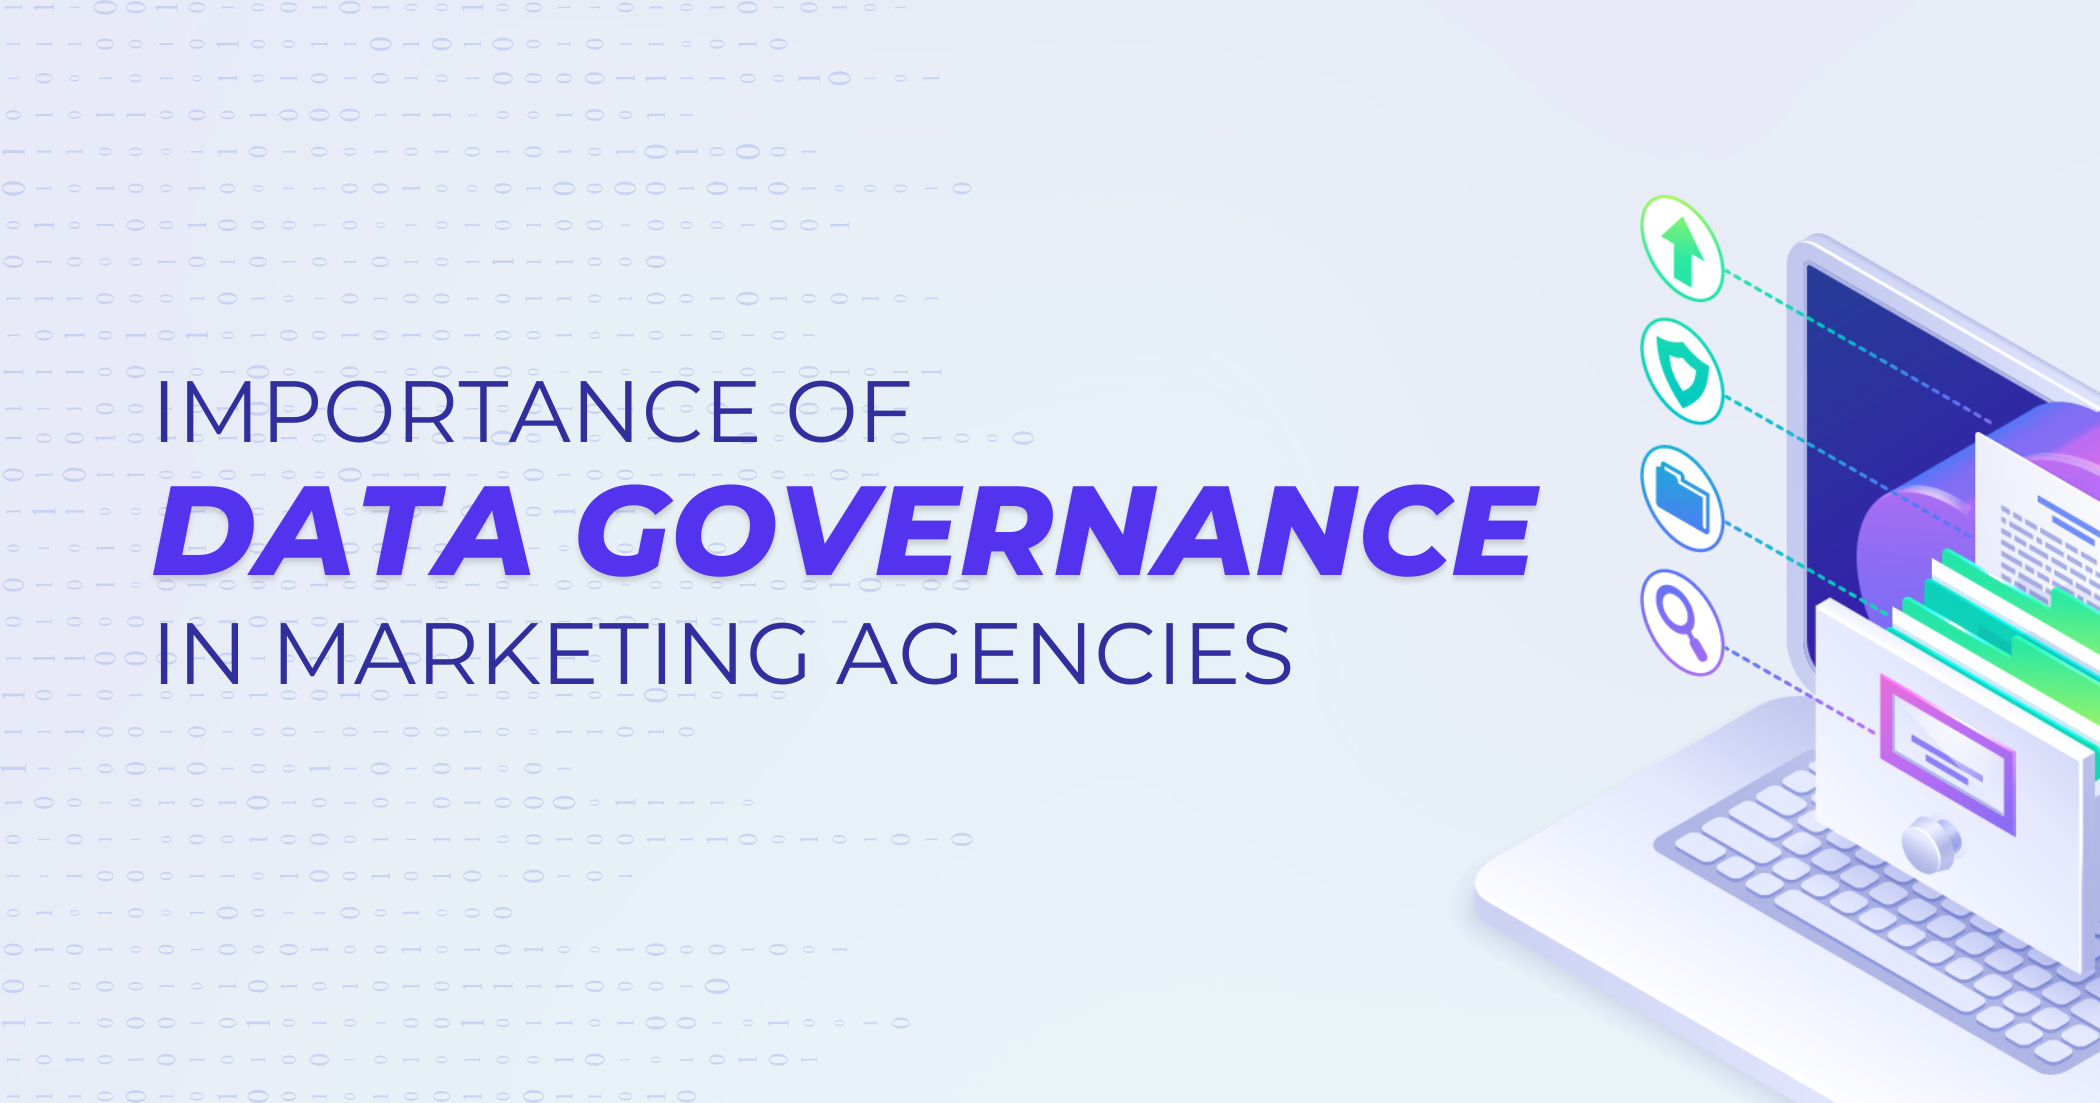 Importance of Data Governance in Marketing Agencies